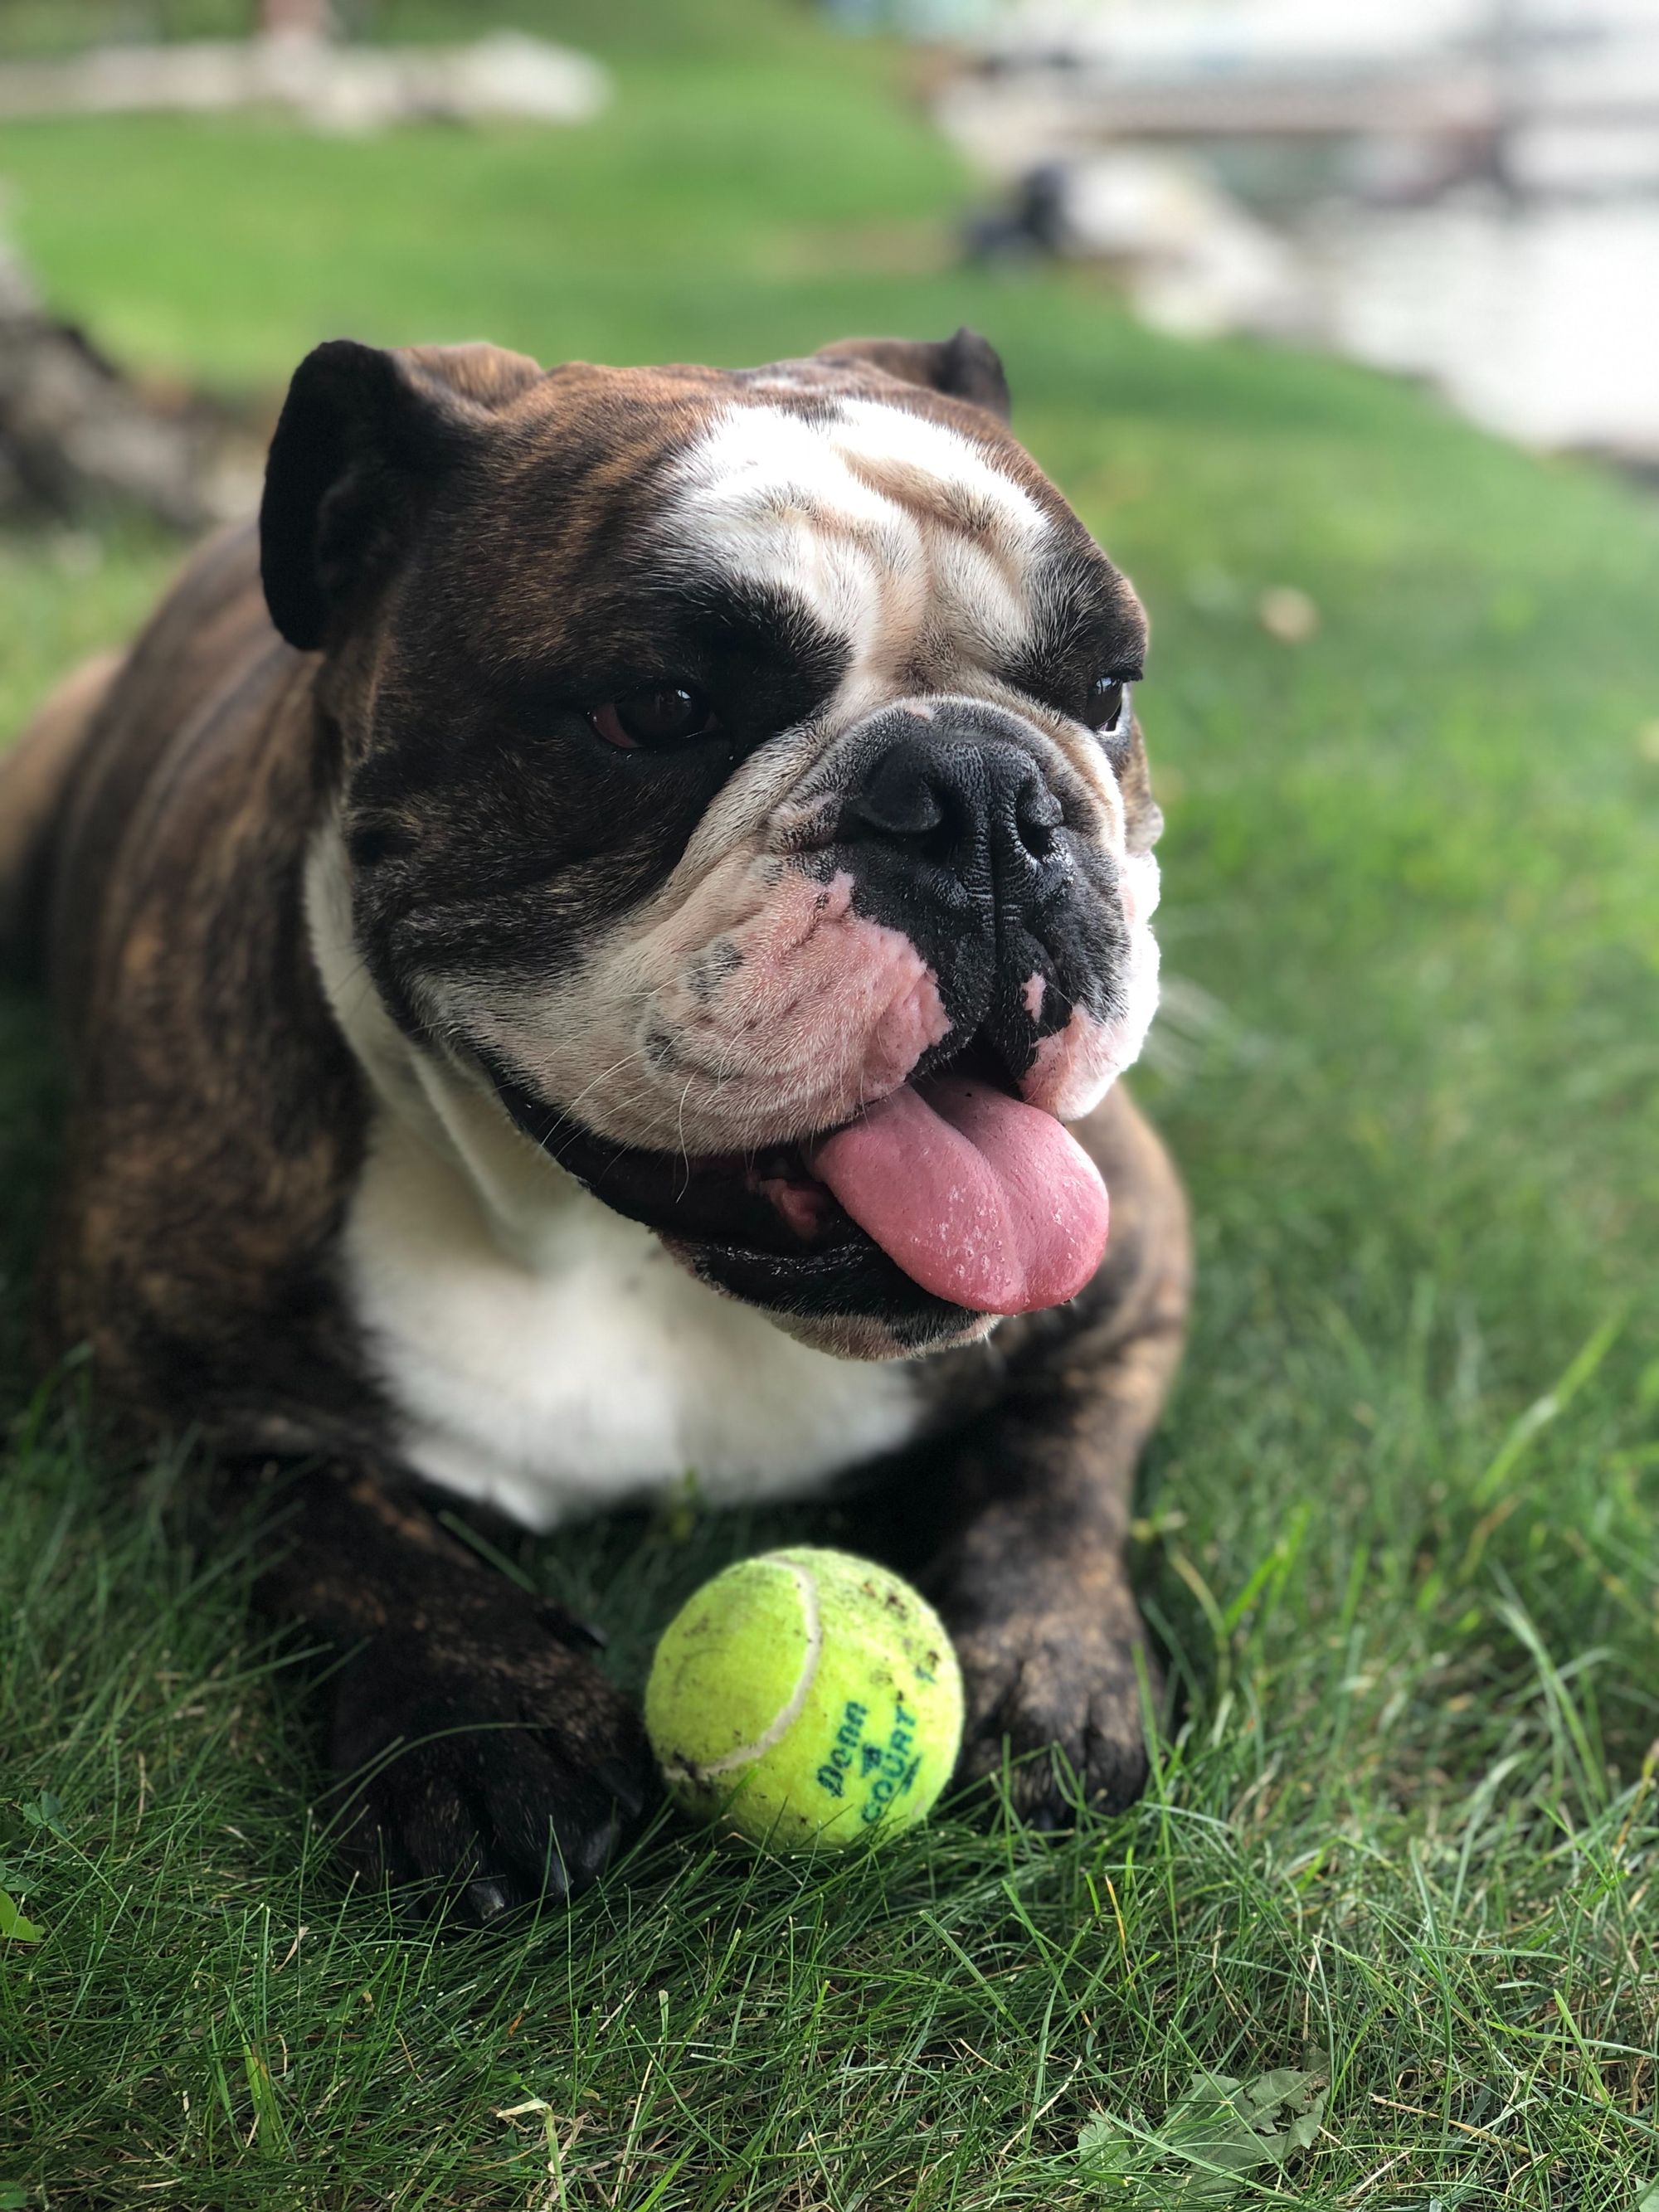 Why Do Dogs Love Tennis Balls?